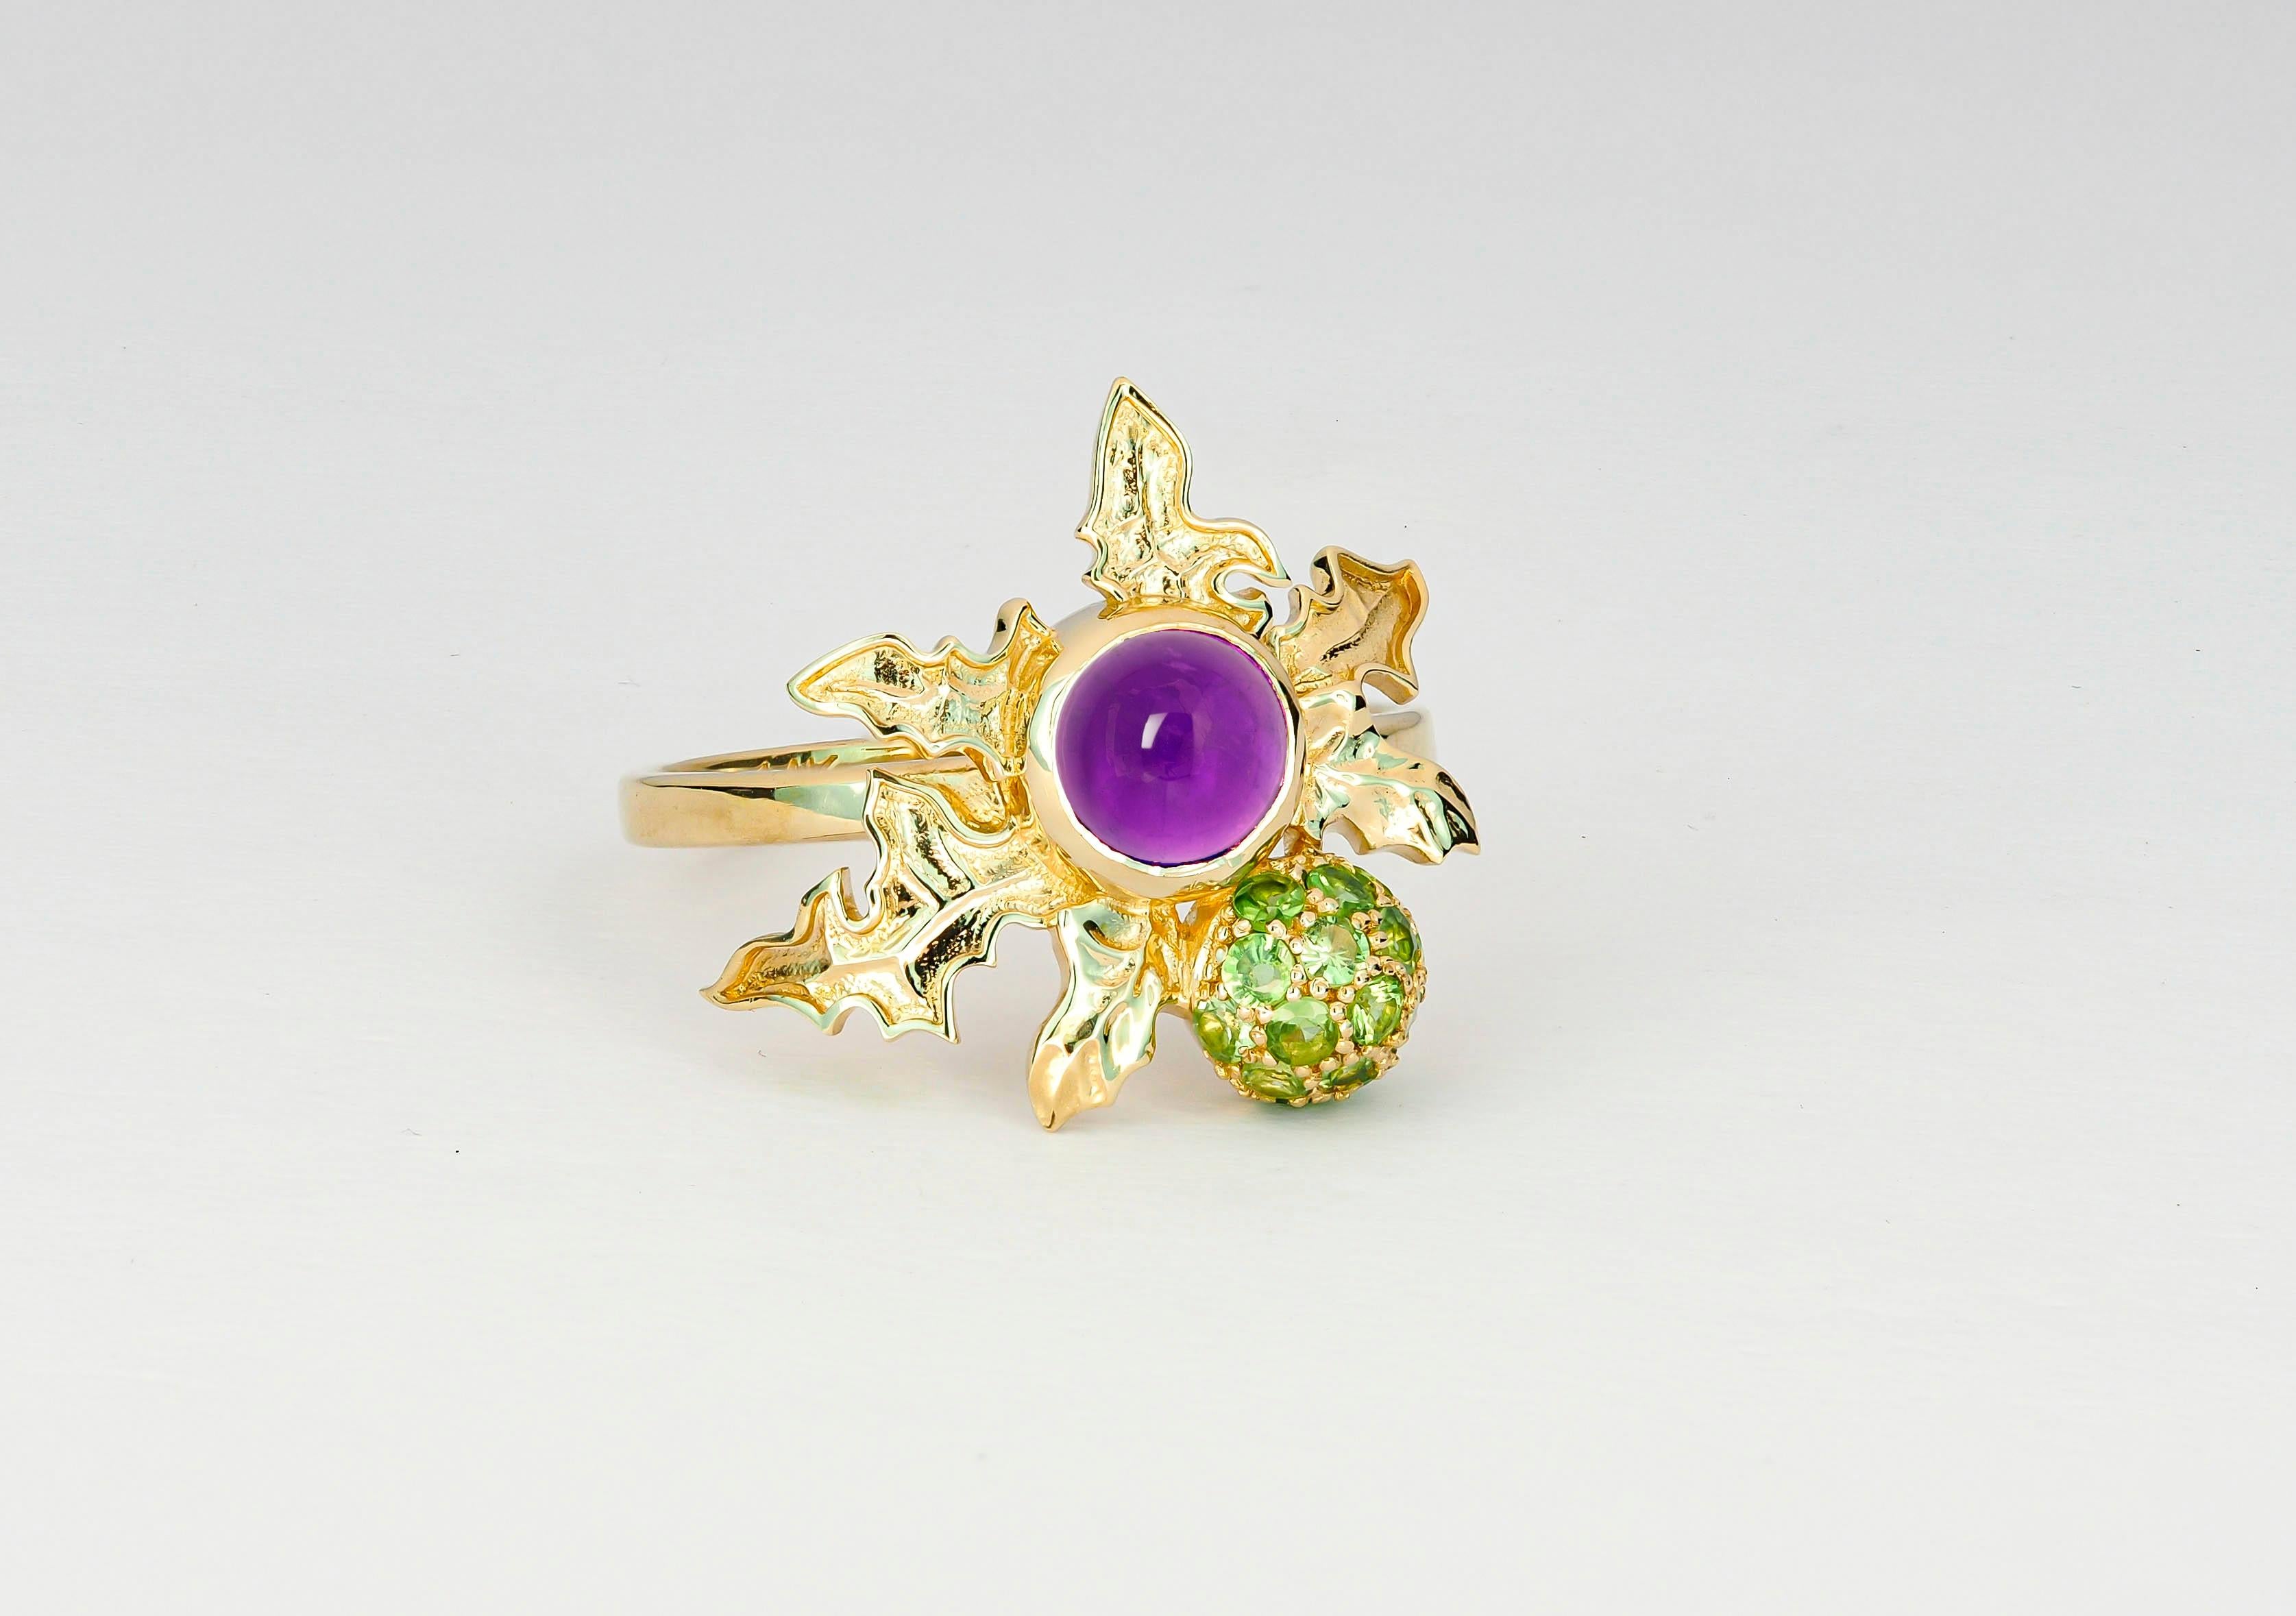 Women's 14 K Gold Scottish Thistle Ring with Amethyst and Peridots